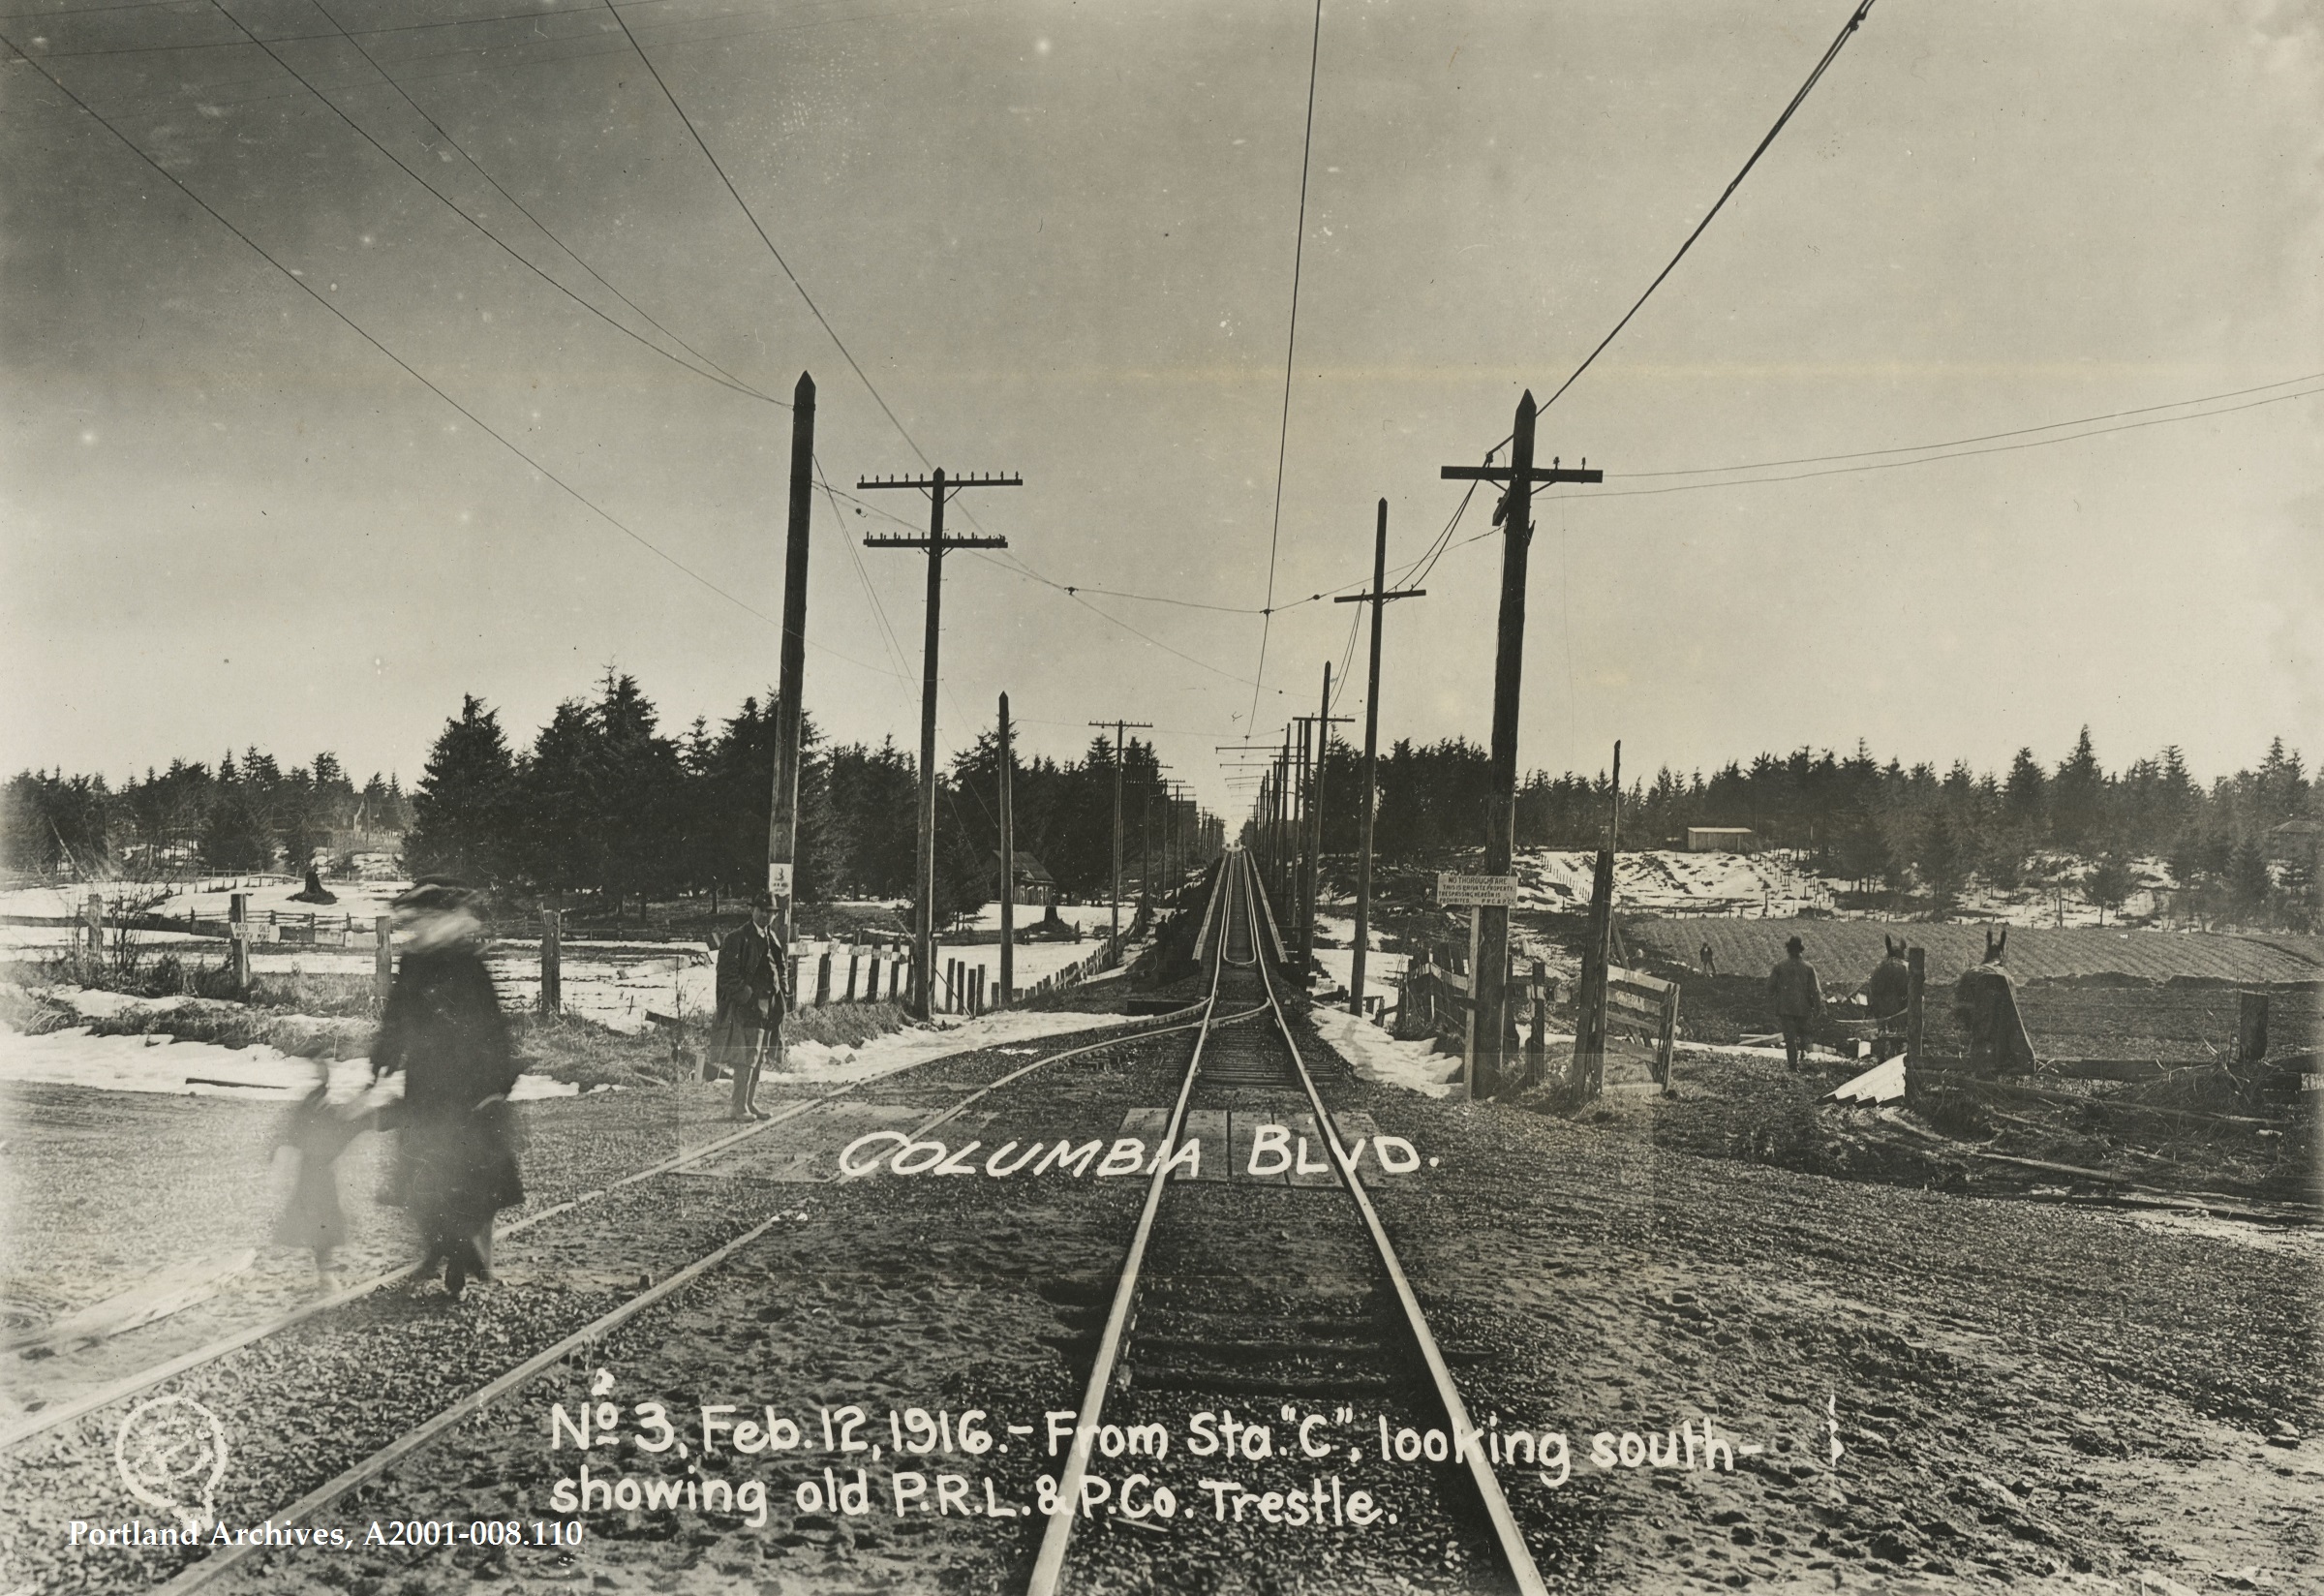 Public Works Administration (Archival) - City ~ 008.110 Looking south from Station C with view of old Portland Railway Light & Power Company street railway trestle and intersection of Columbia Blvd and Union Ave.JPG